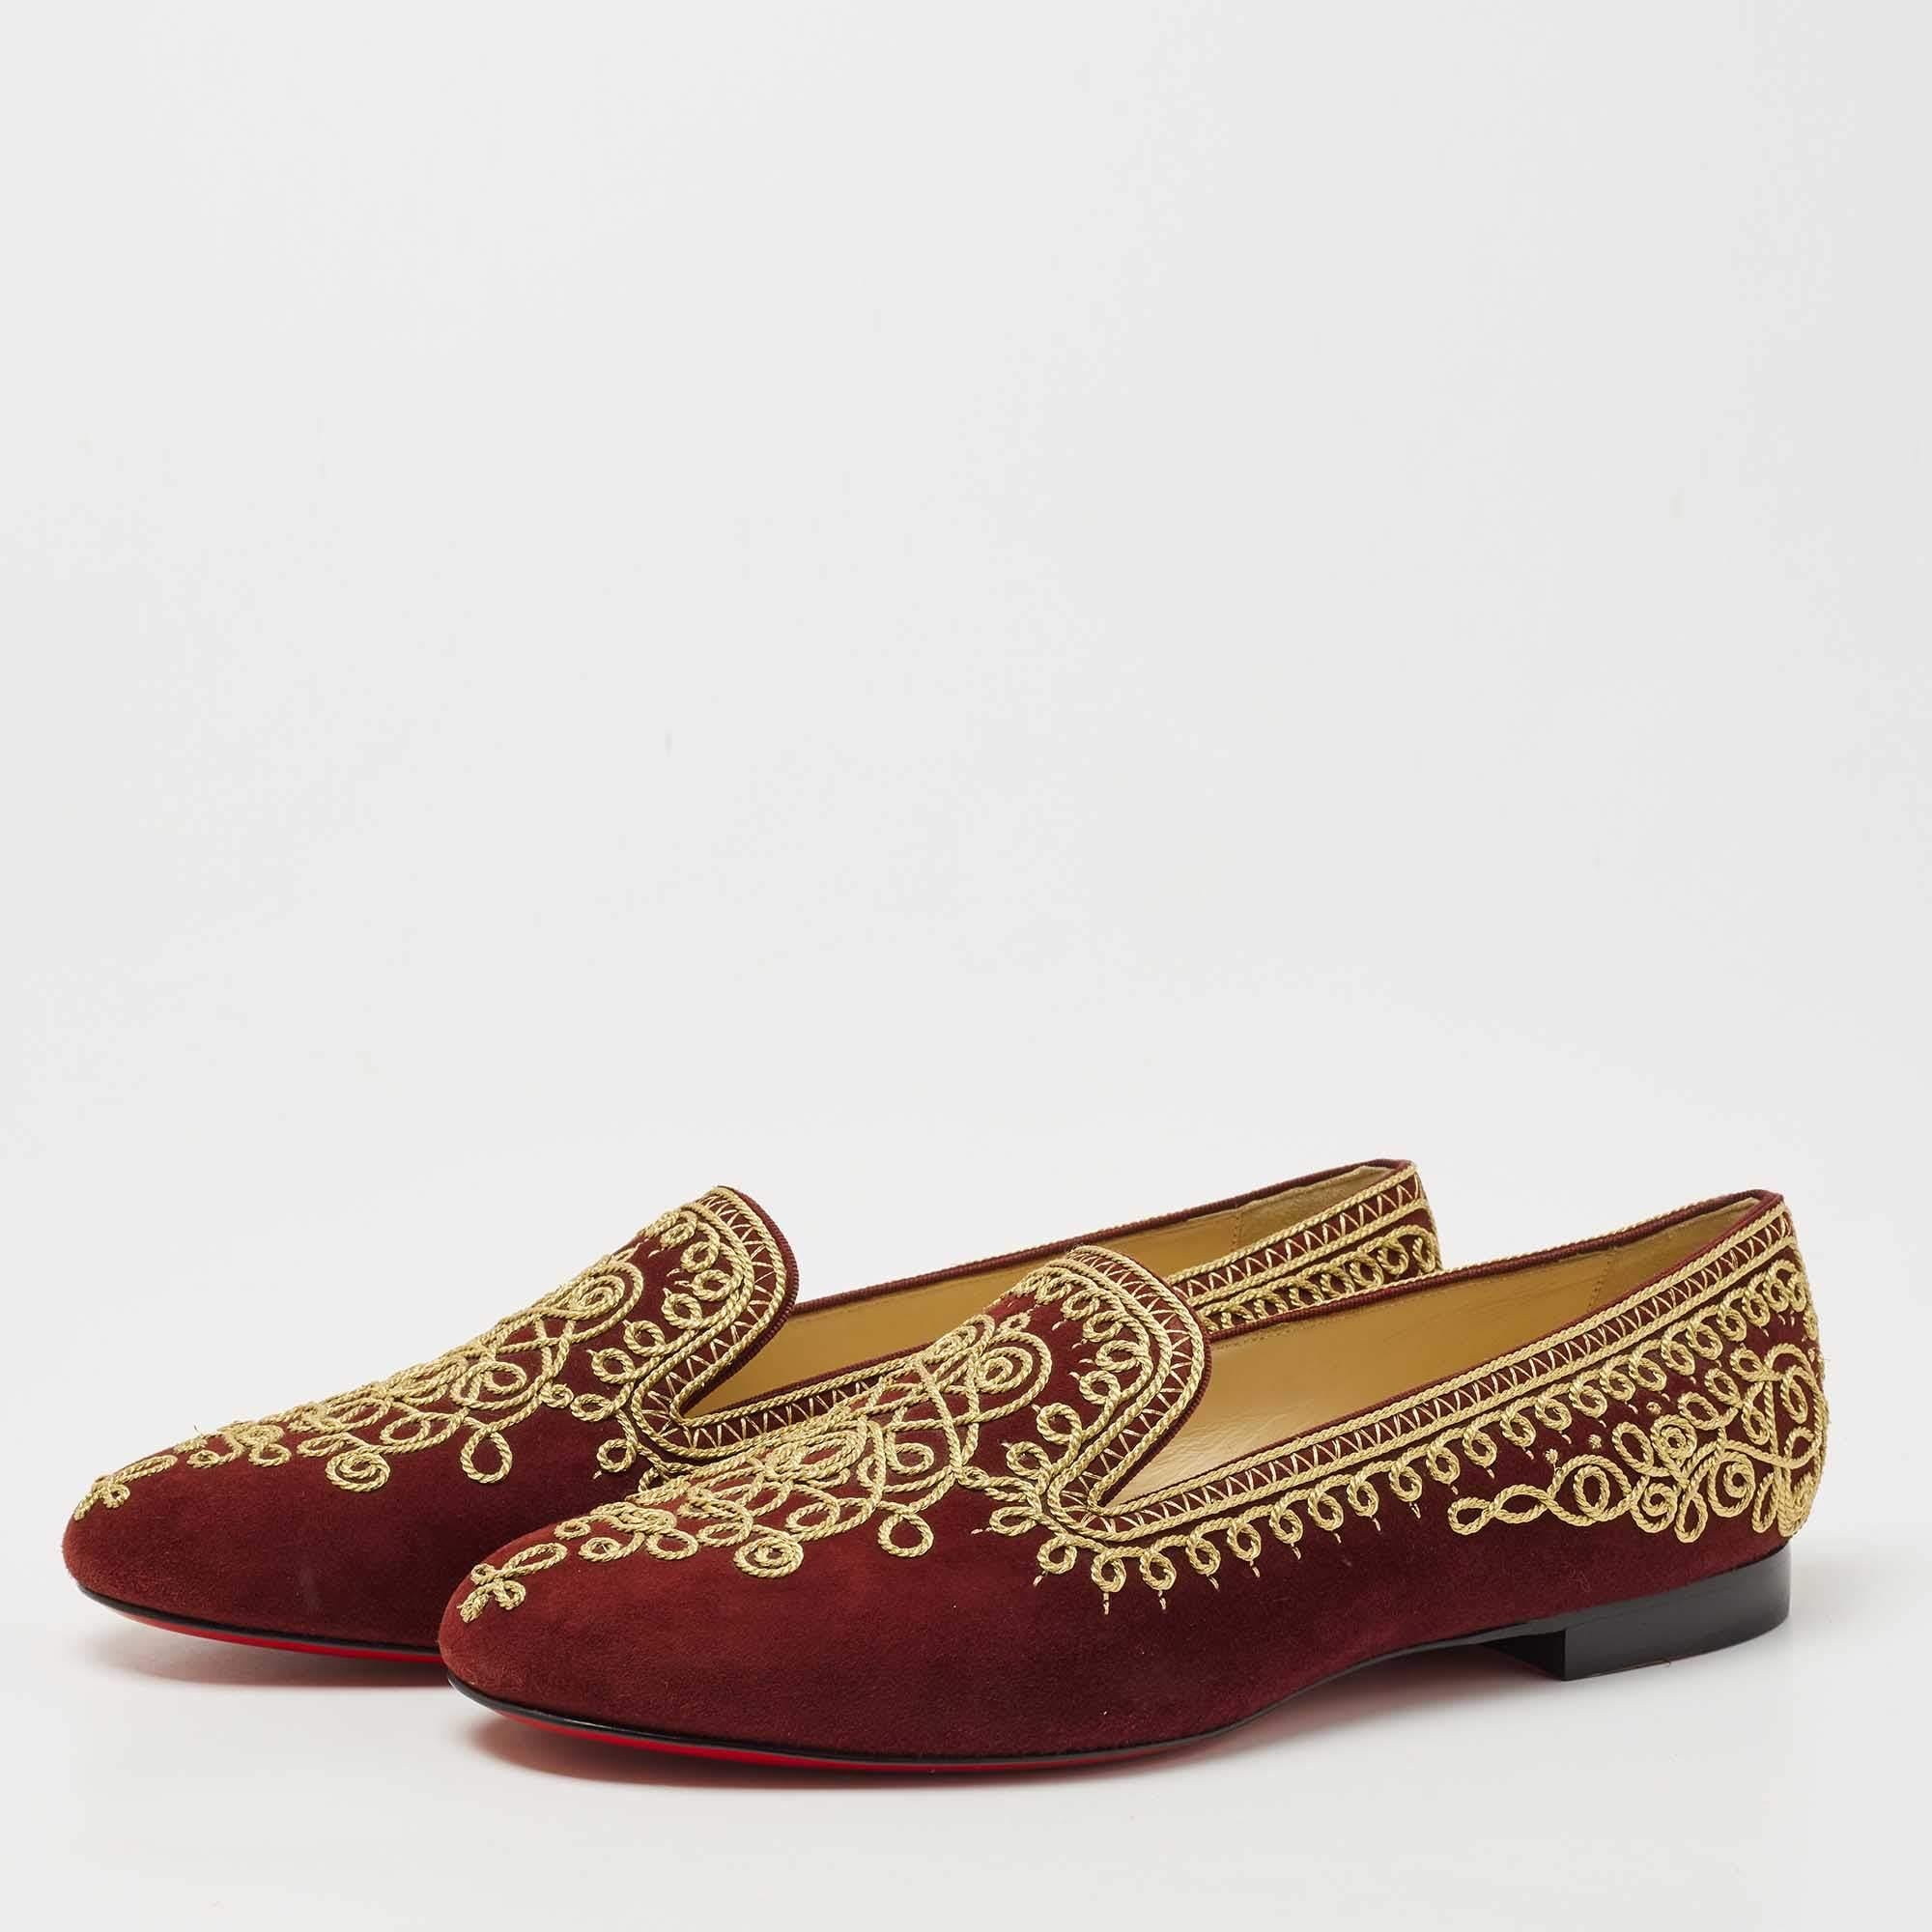 Christian Louboutin Burgundy Embroidered Mamounia Smoking Slippers Size 40.5 In New Condition For Sale In Dubai, Al Qouz 2